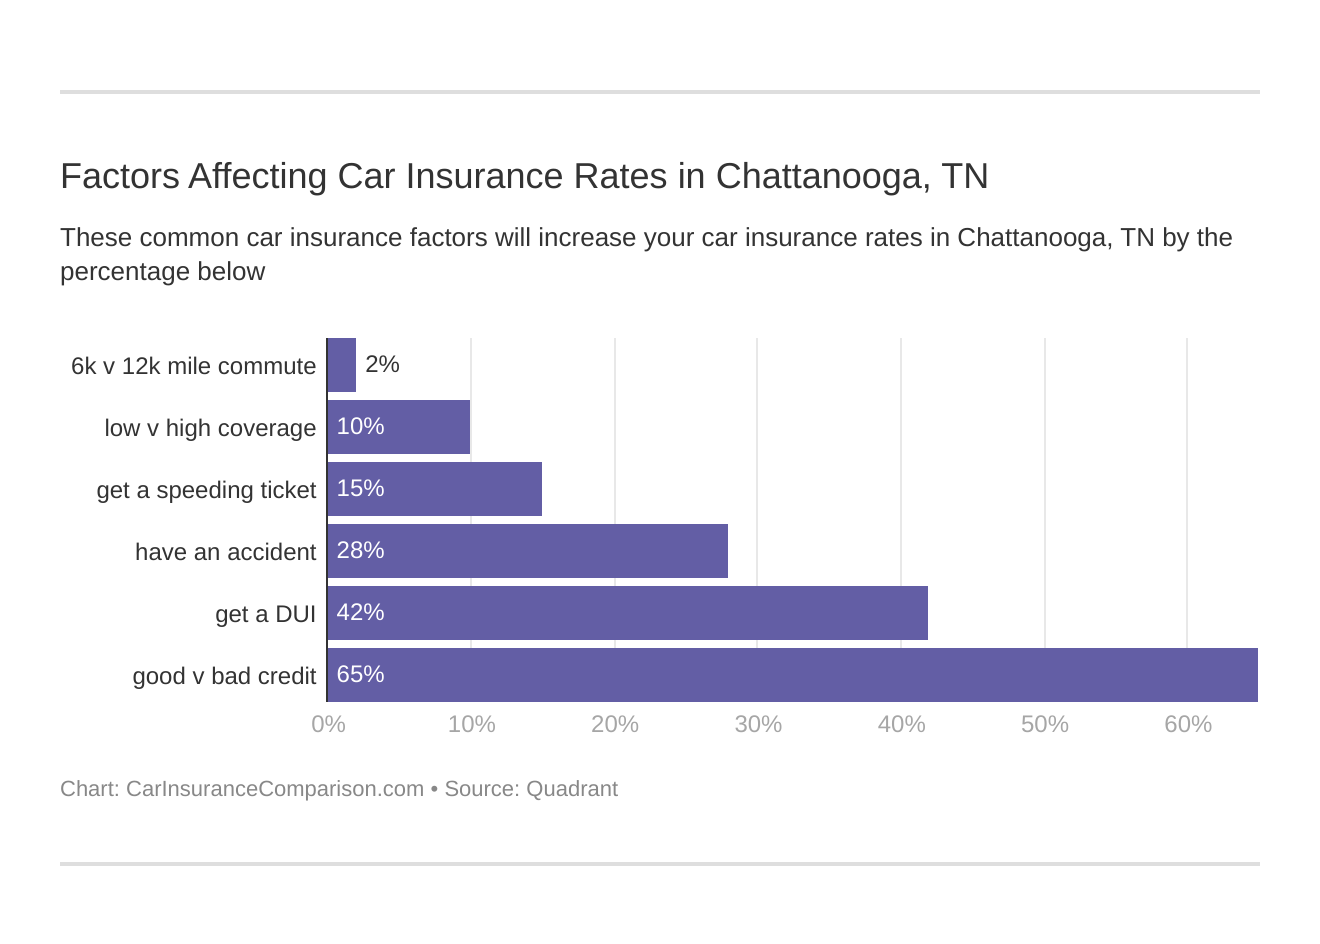 Factors Affecting Car Insurance Rates in Chattanooga, TN